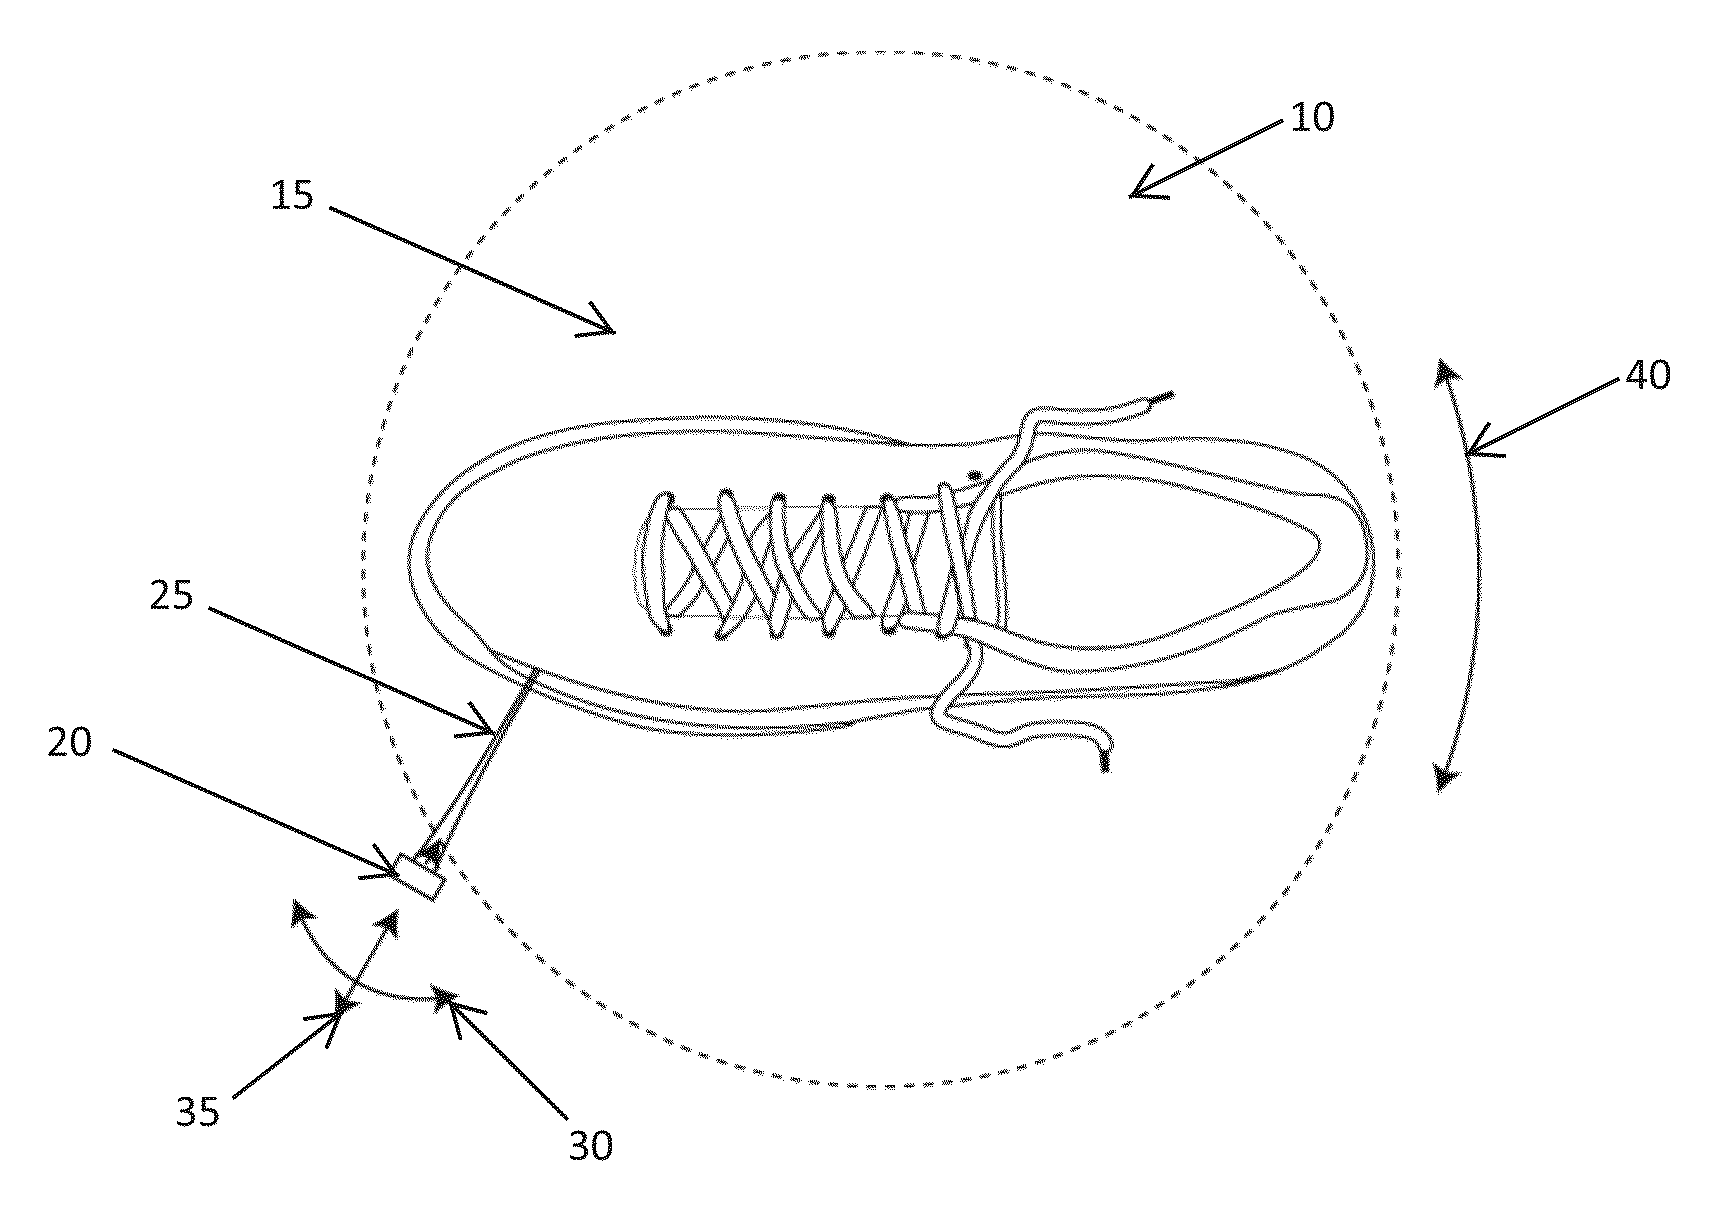 Method of Providing Decorative Designs and Structural Features on an Article of Footwear